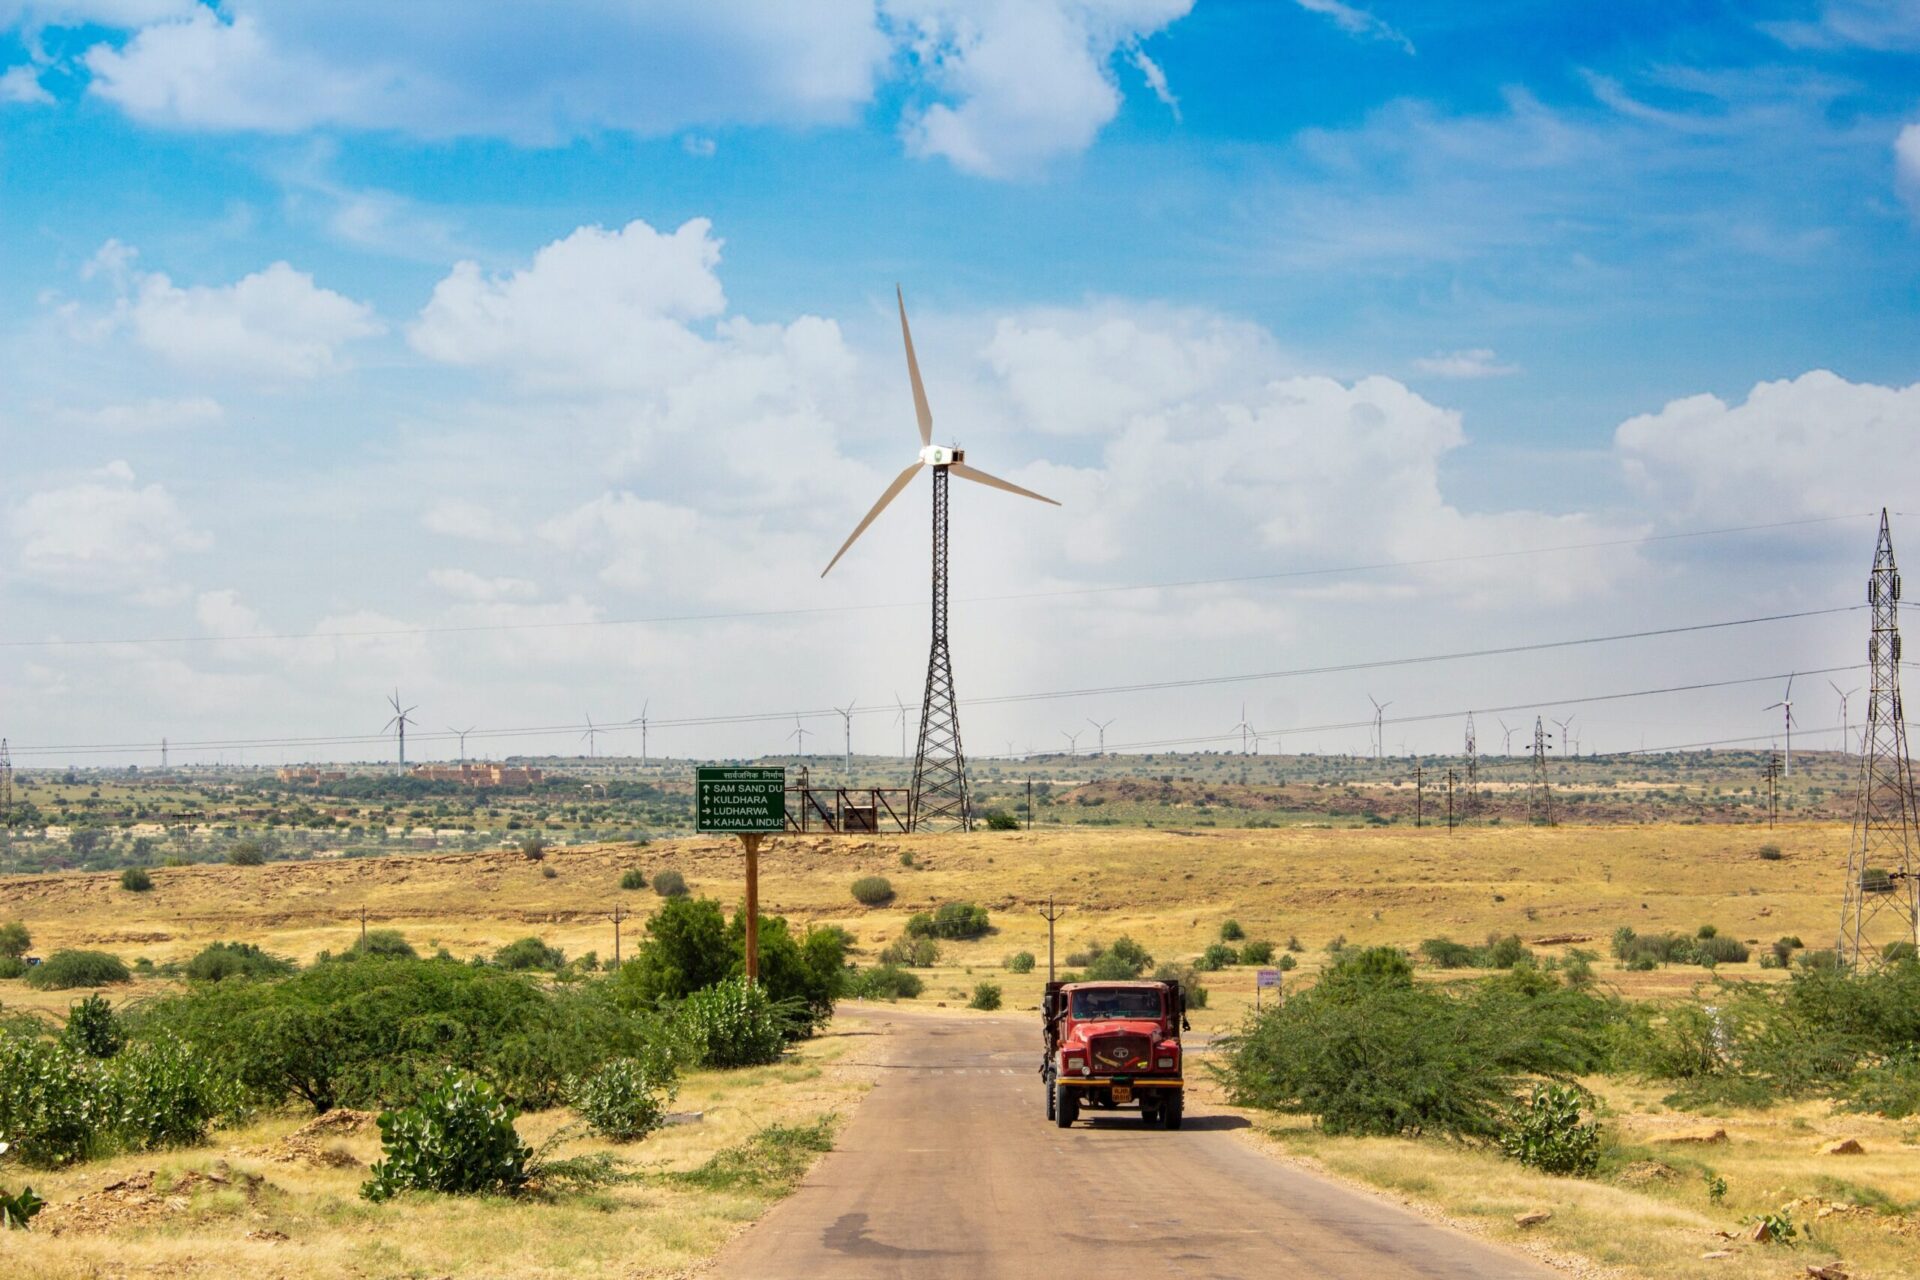 A truck drives down a road in front of a windmill framed by blue sky and fields